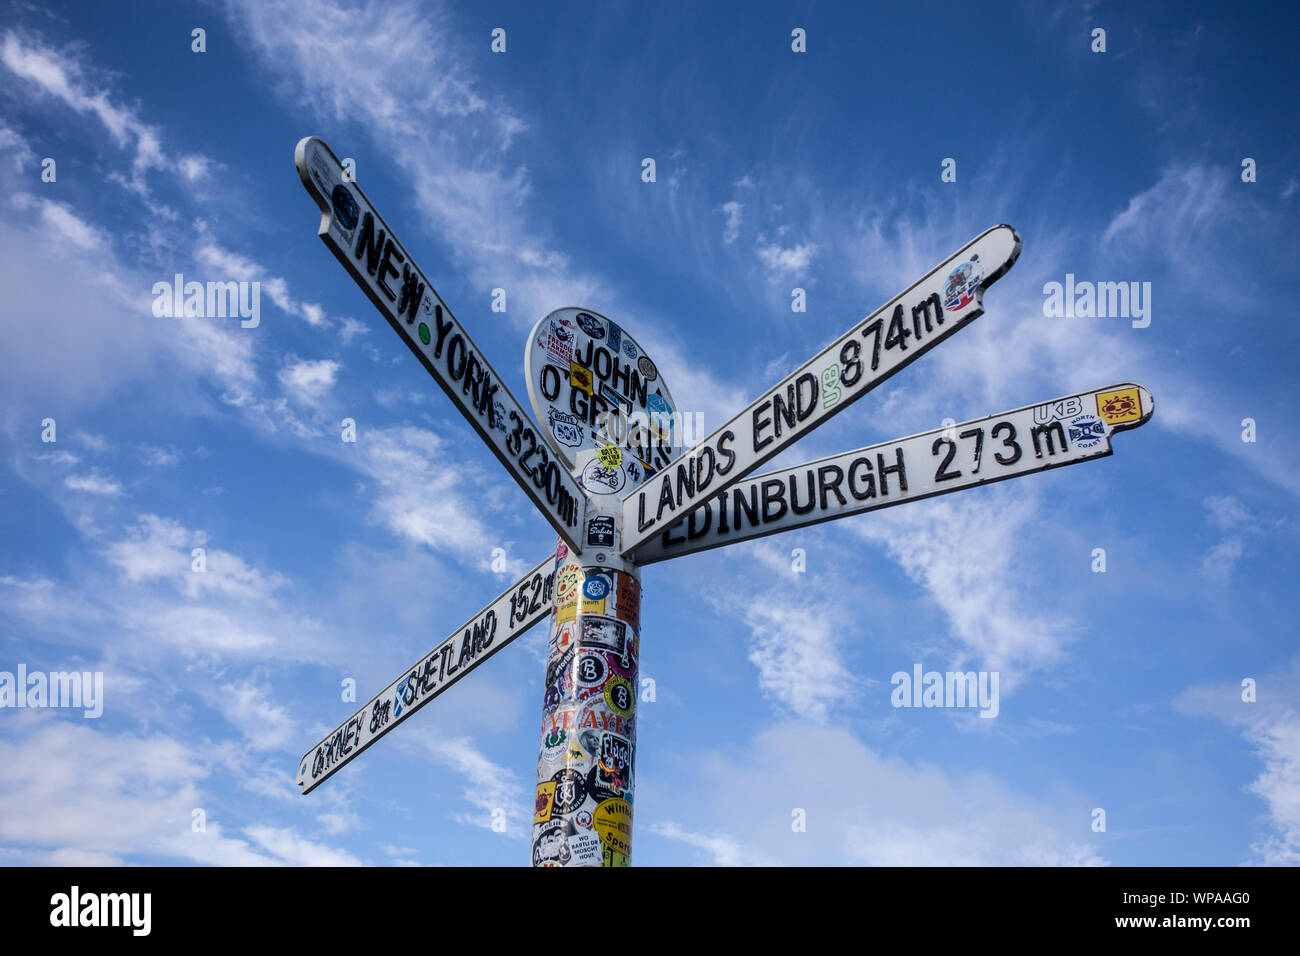 The milepost sign at John O Groats in Scotland Stock Photo